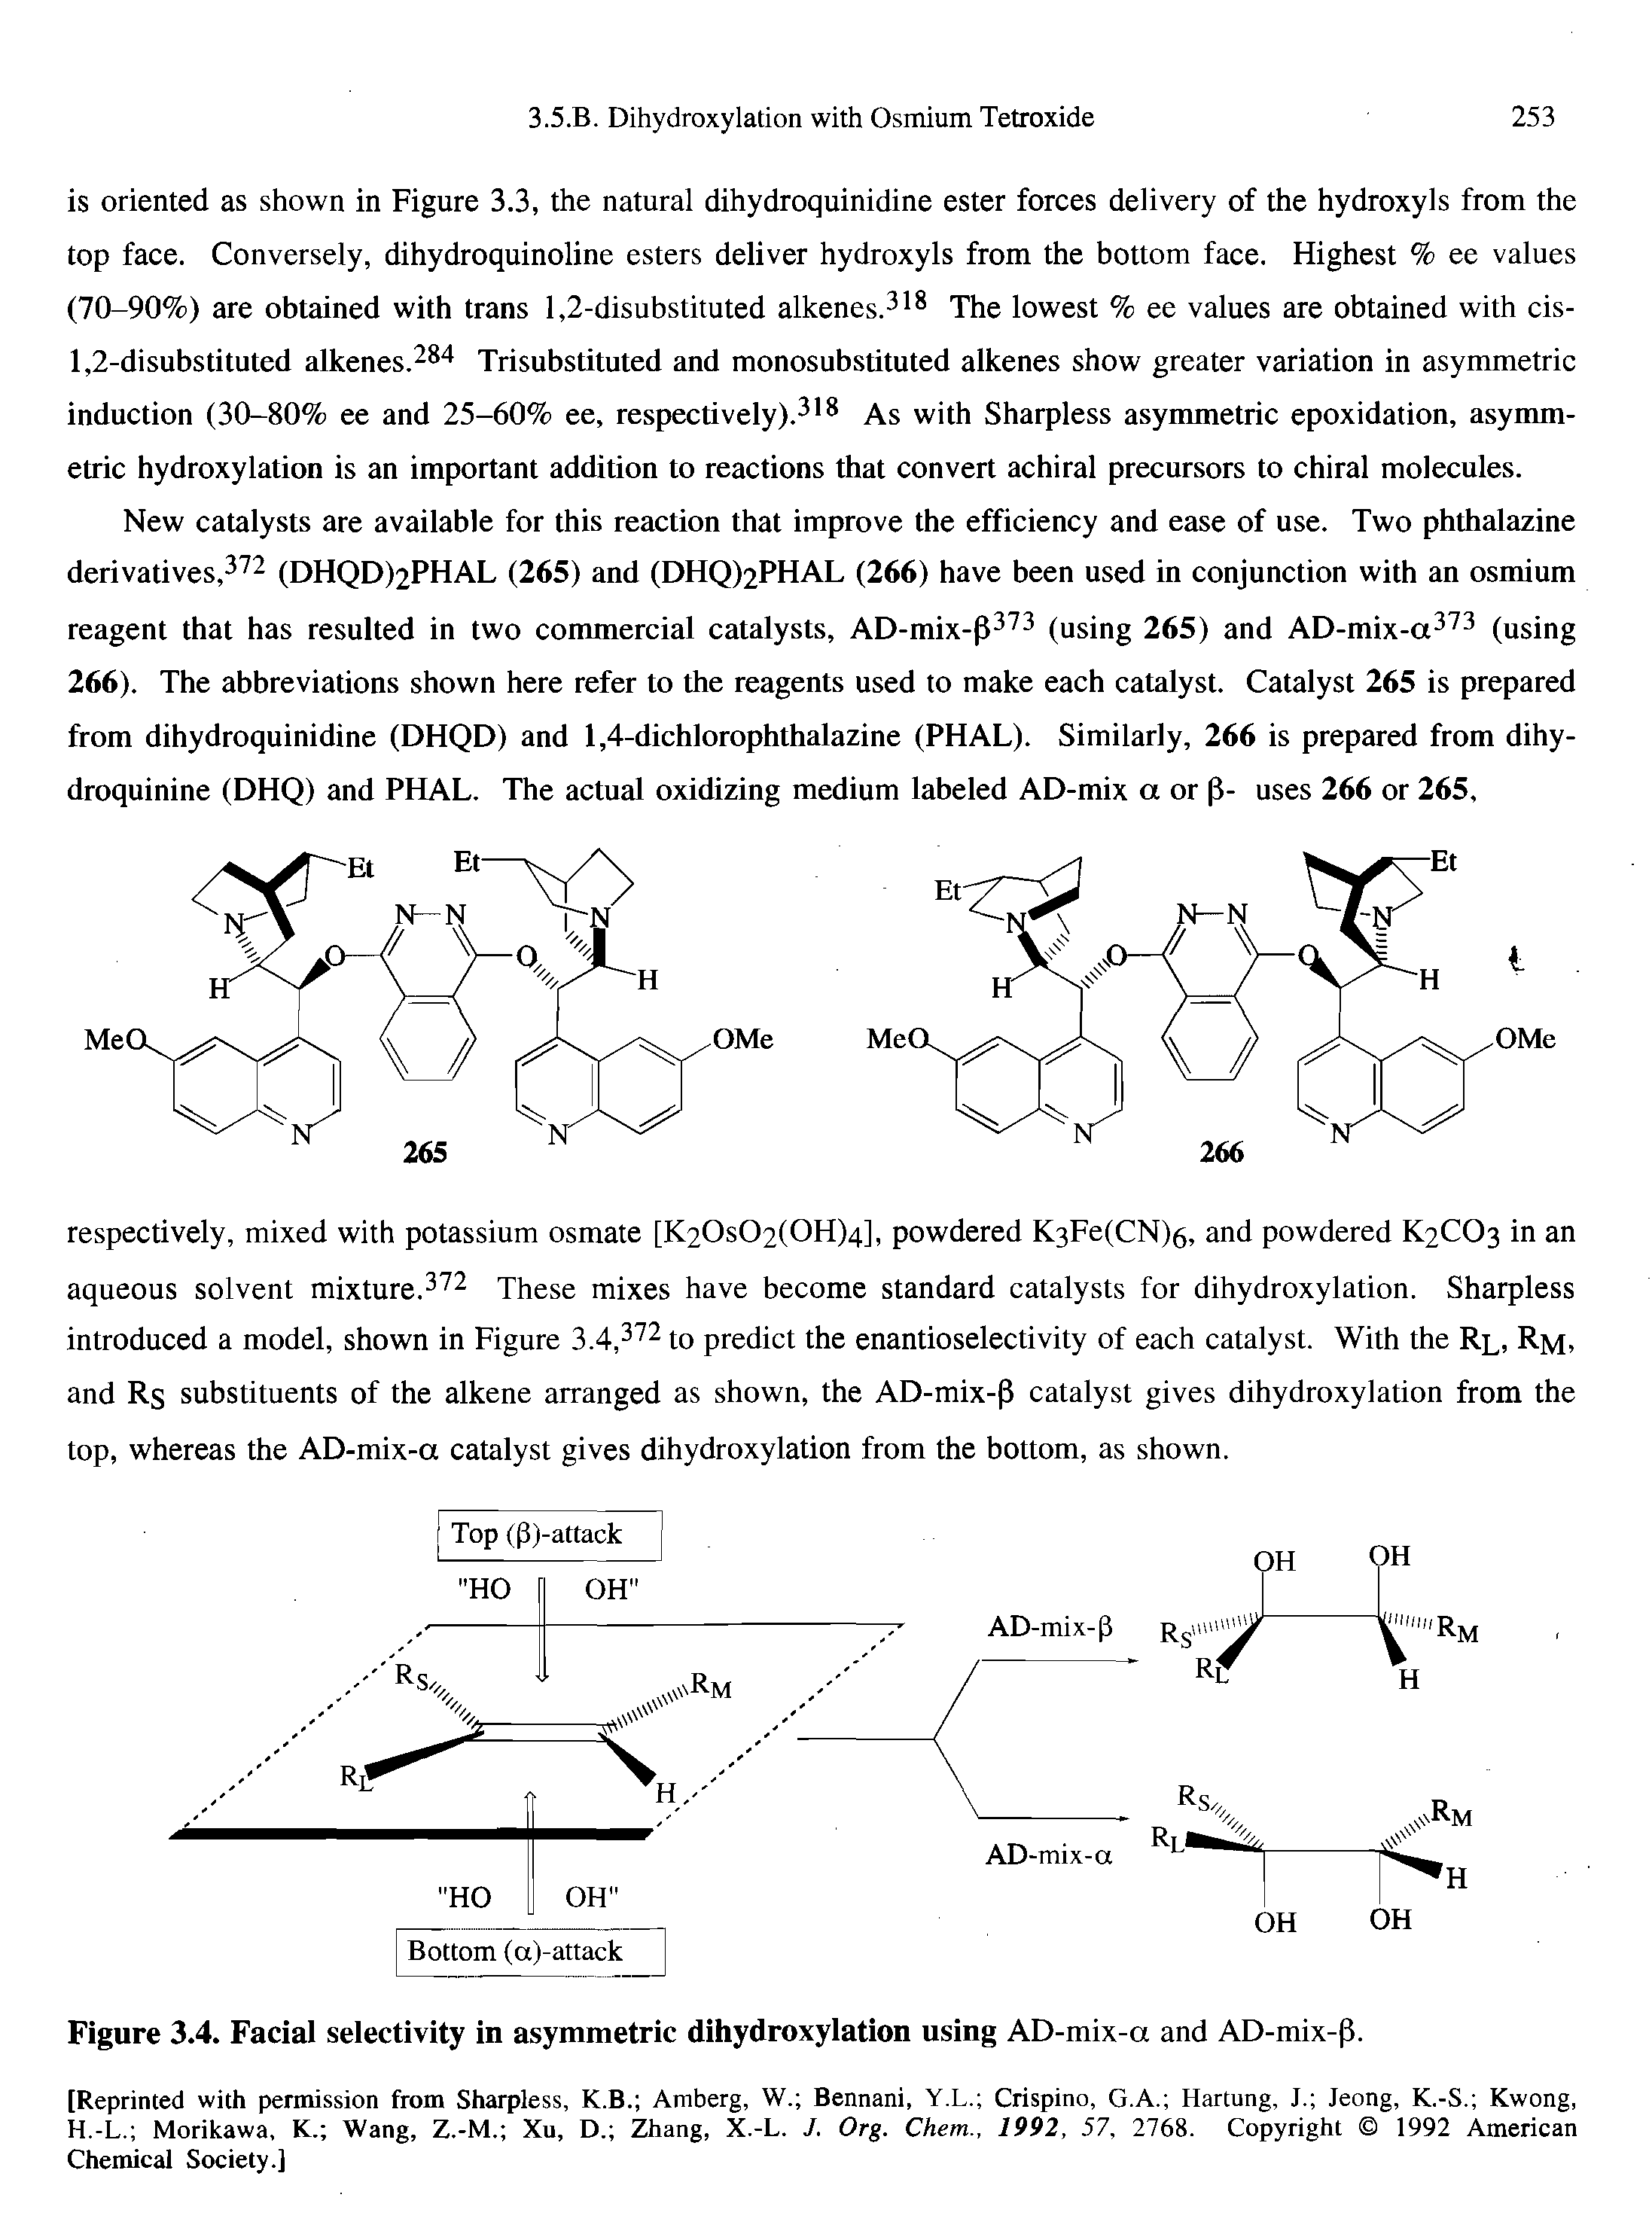 Figure 3.4. Facial selectivity in asymmetric dihydroxylation using AD-mix-a and AD-mix-p.